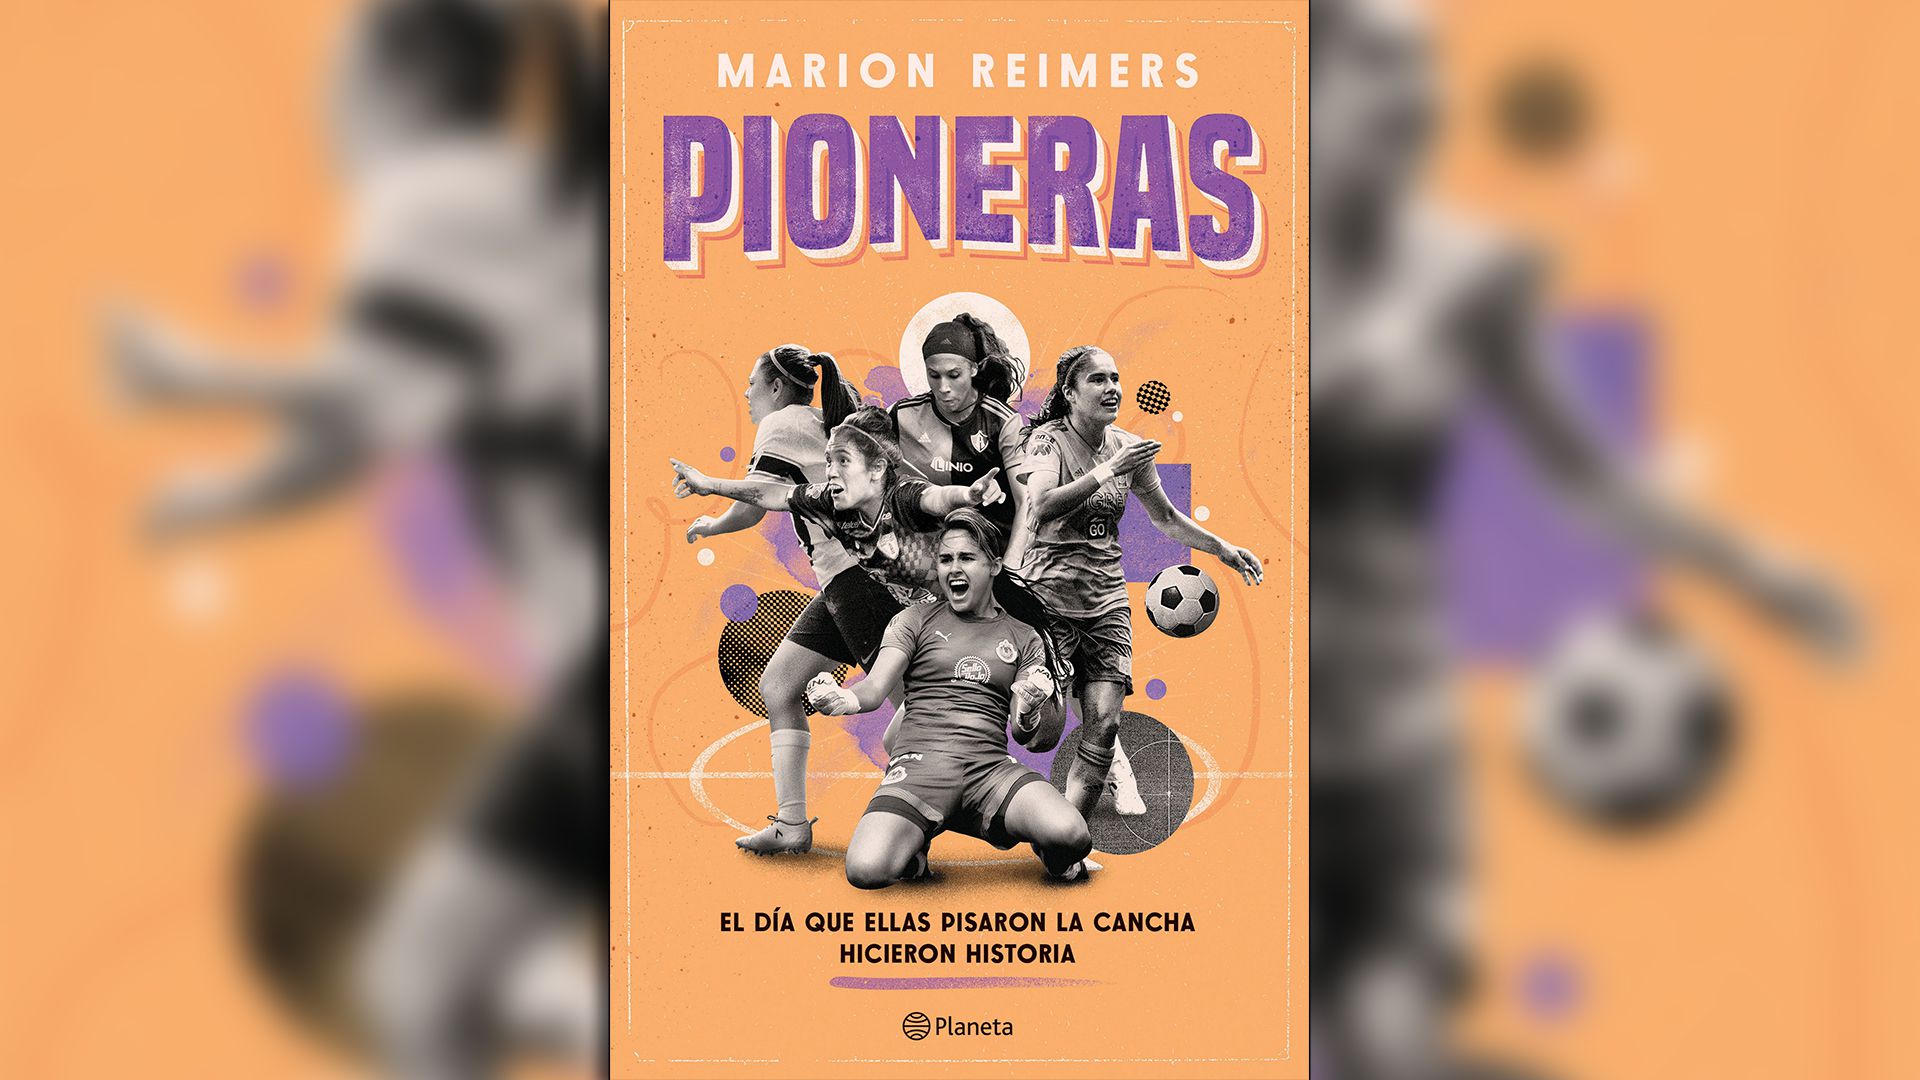 Cover of the book "Pioneras", by Marion Reimers". (Planet of Books).